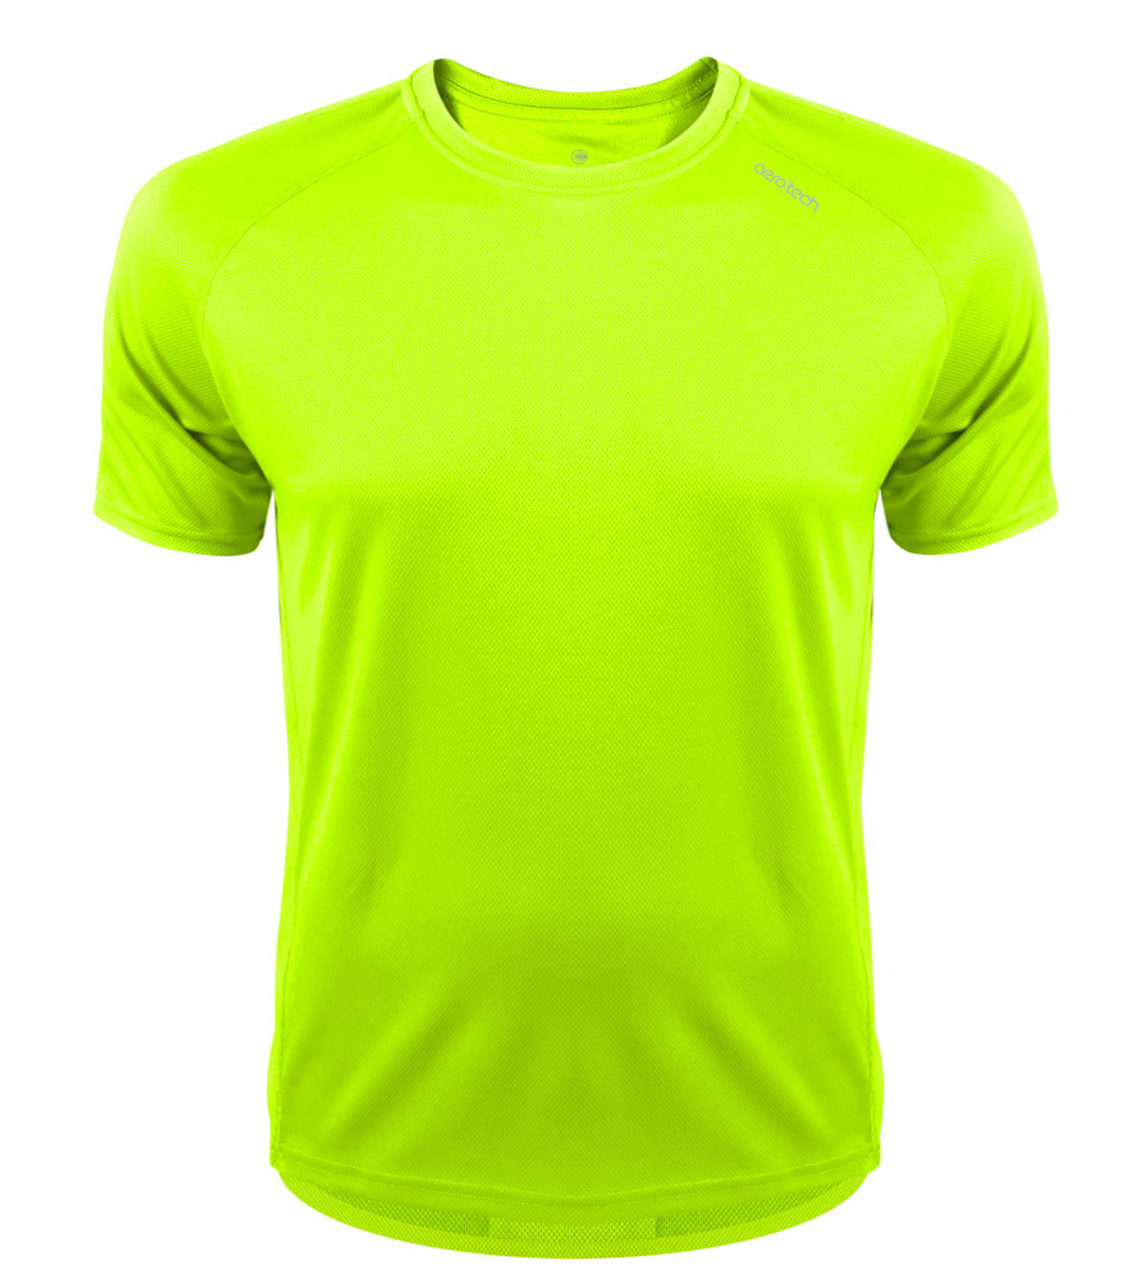 Men's Tech Performance Cycling Tee Shirt with Pocket and Reflective Trim